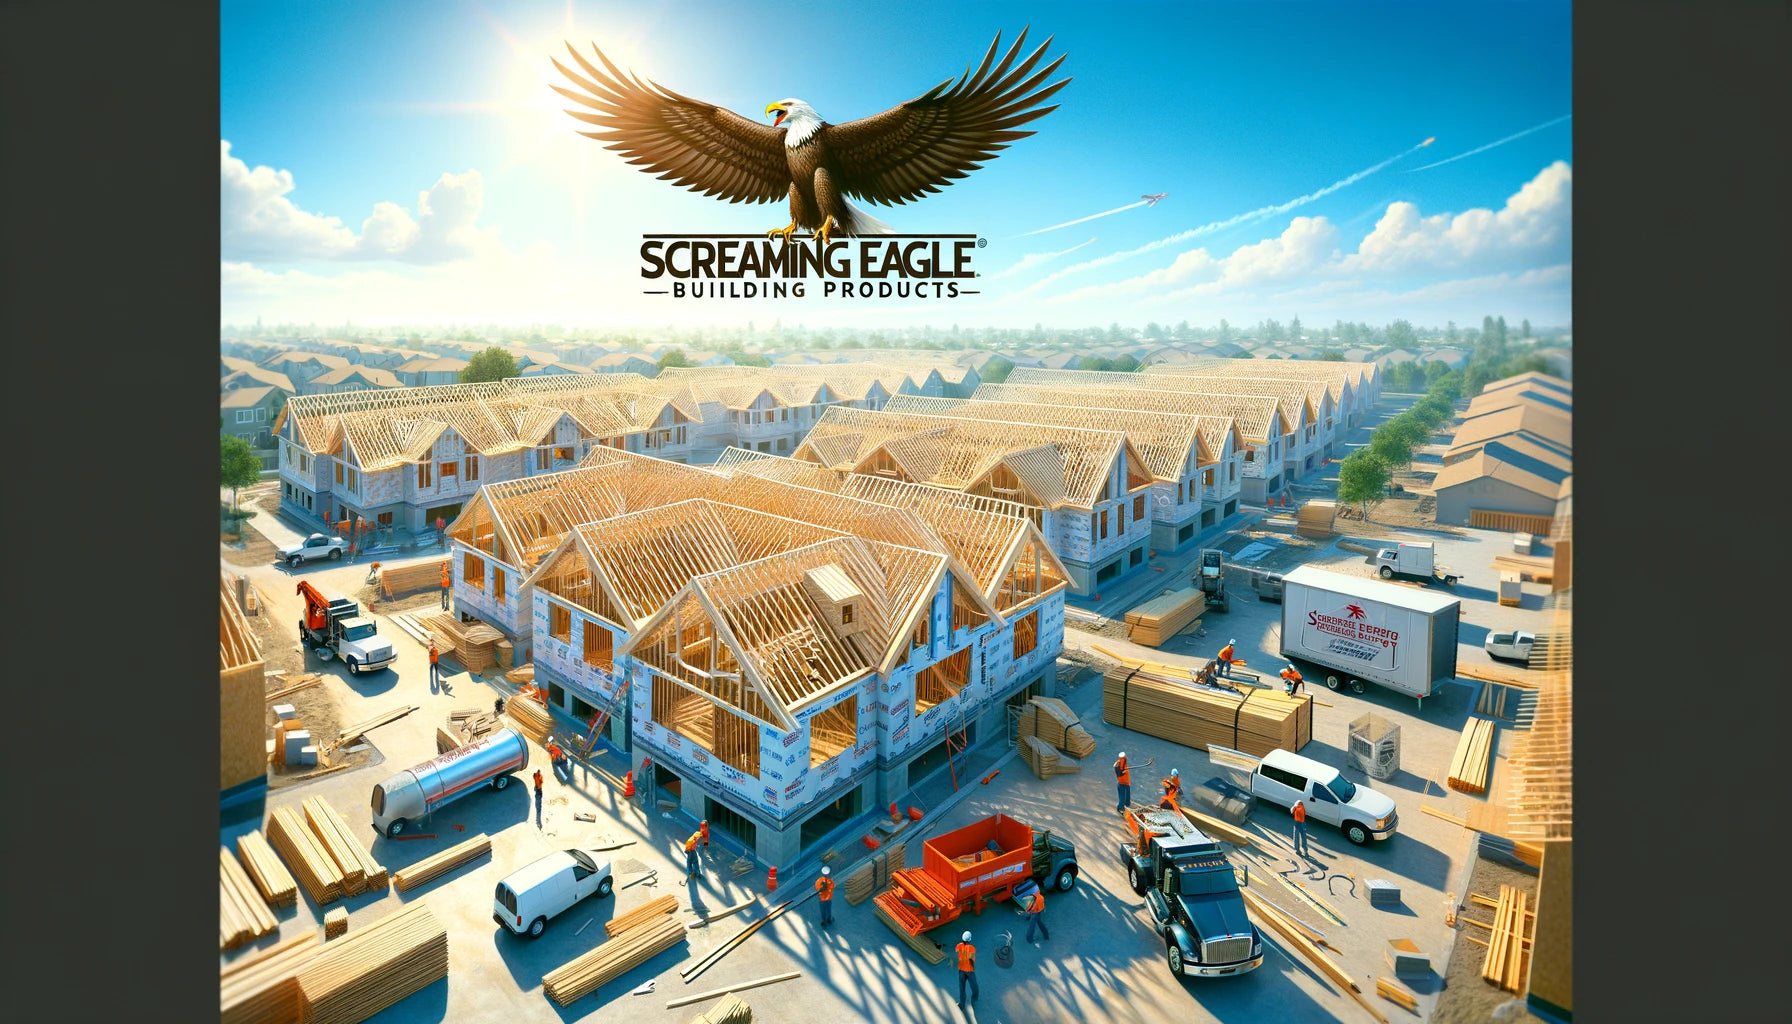 Screaming Eagle Building Products